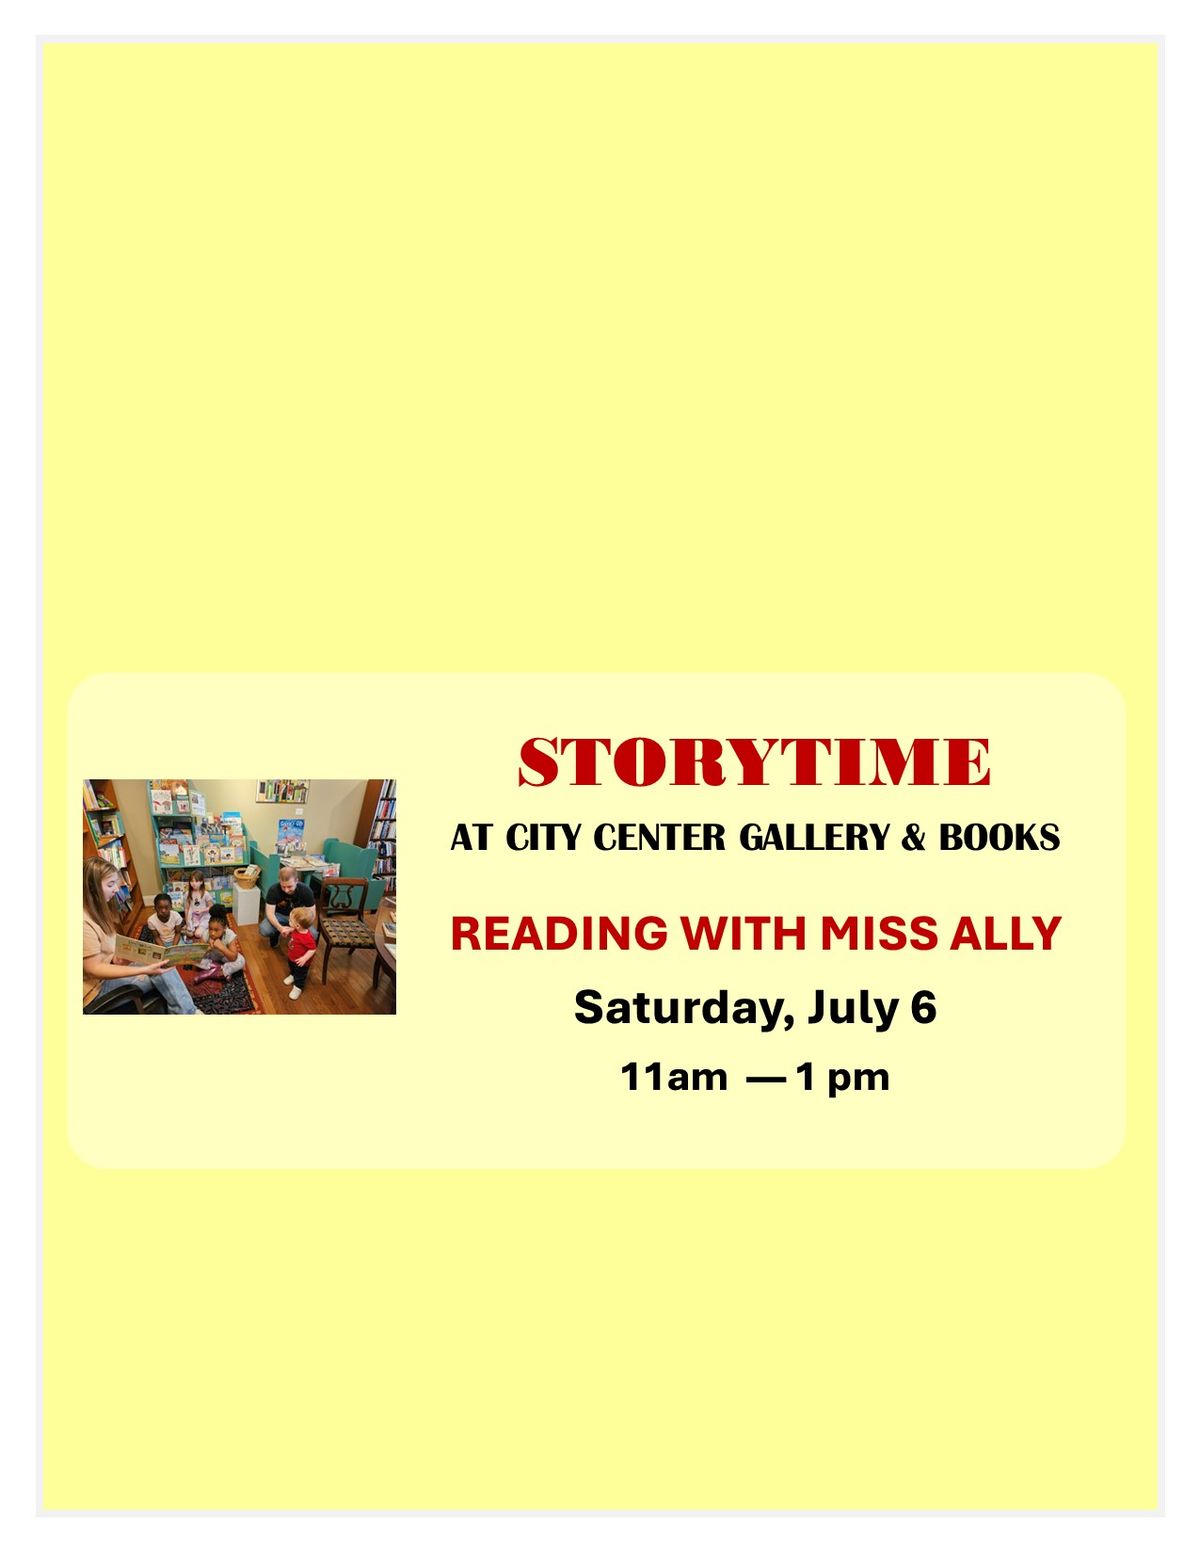 STORYTIME WITH MISS ALLY